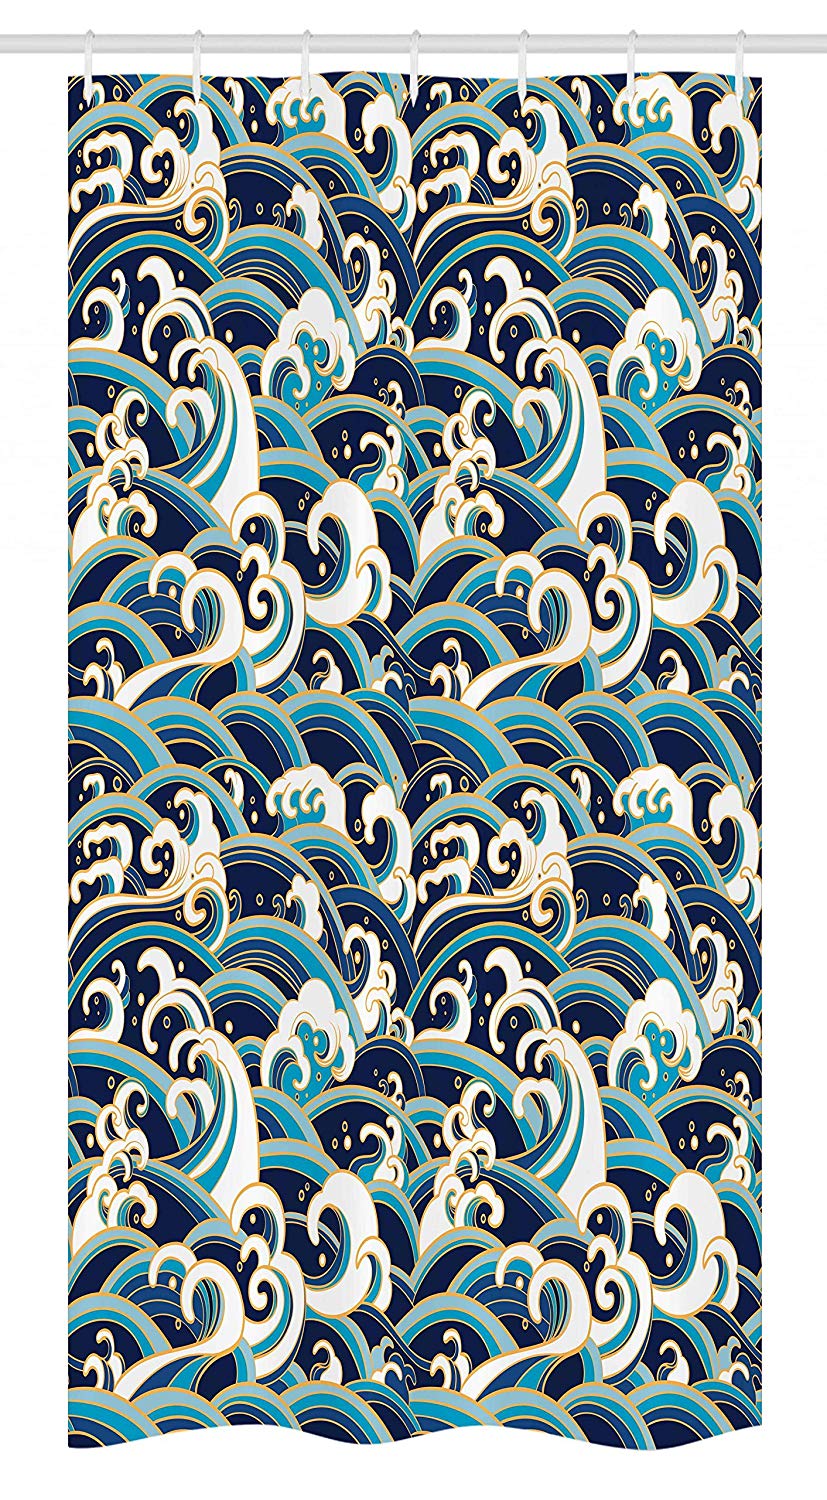 Ambesonne Nautical Decor Stall Shower Curtain, Traditional Oriental Style Ocean Waves Pattern with Foam and Splashes Print, Fabric Bathroom Decor Set with Hooks, 36 W x 72 L Inches, Blue White